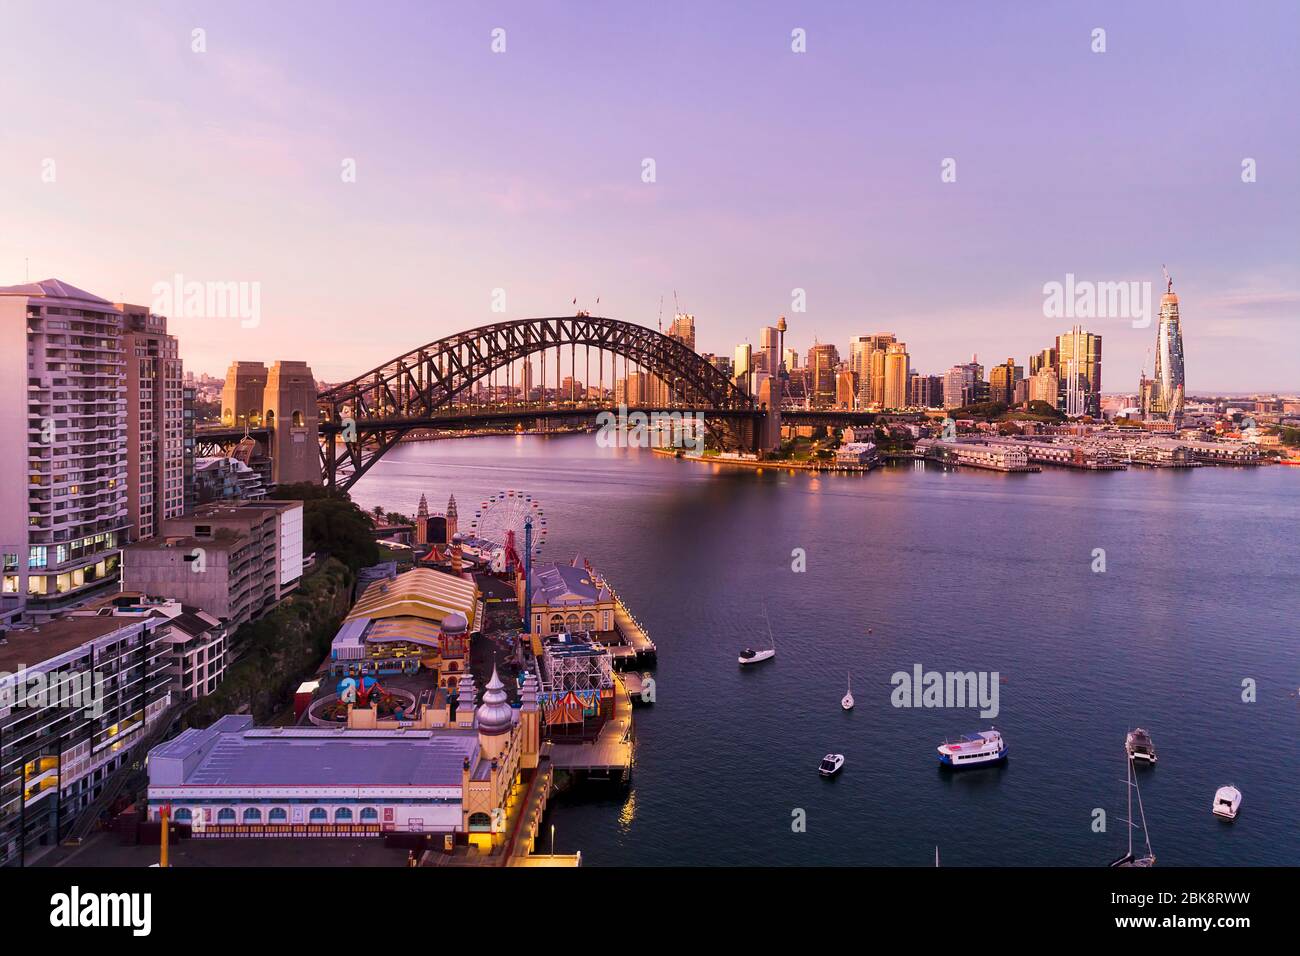 Aerial view over entertainment park and walkway on shores of Lavender bay of Sydney Harbour at sunrise. Stock Photo